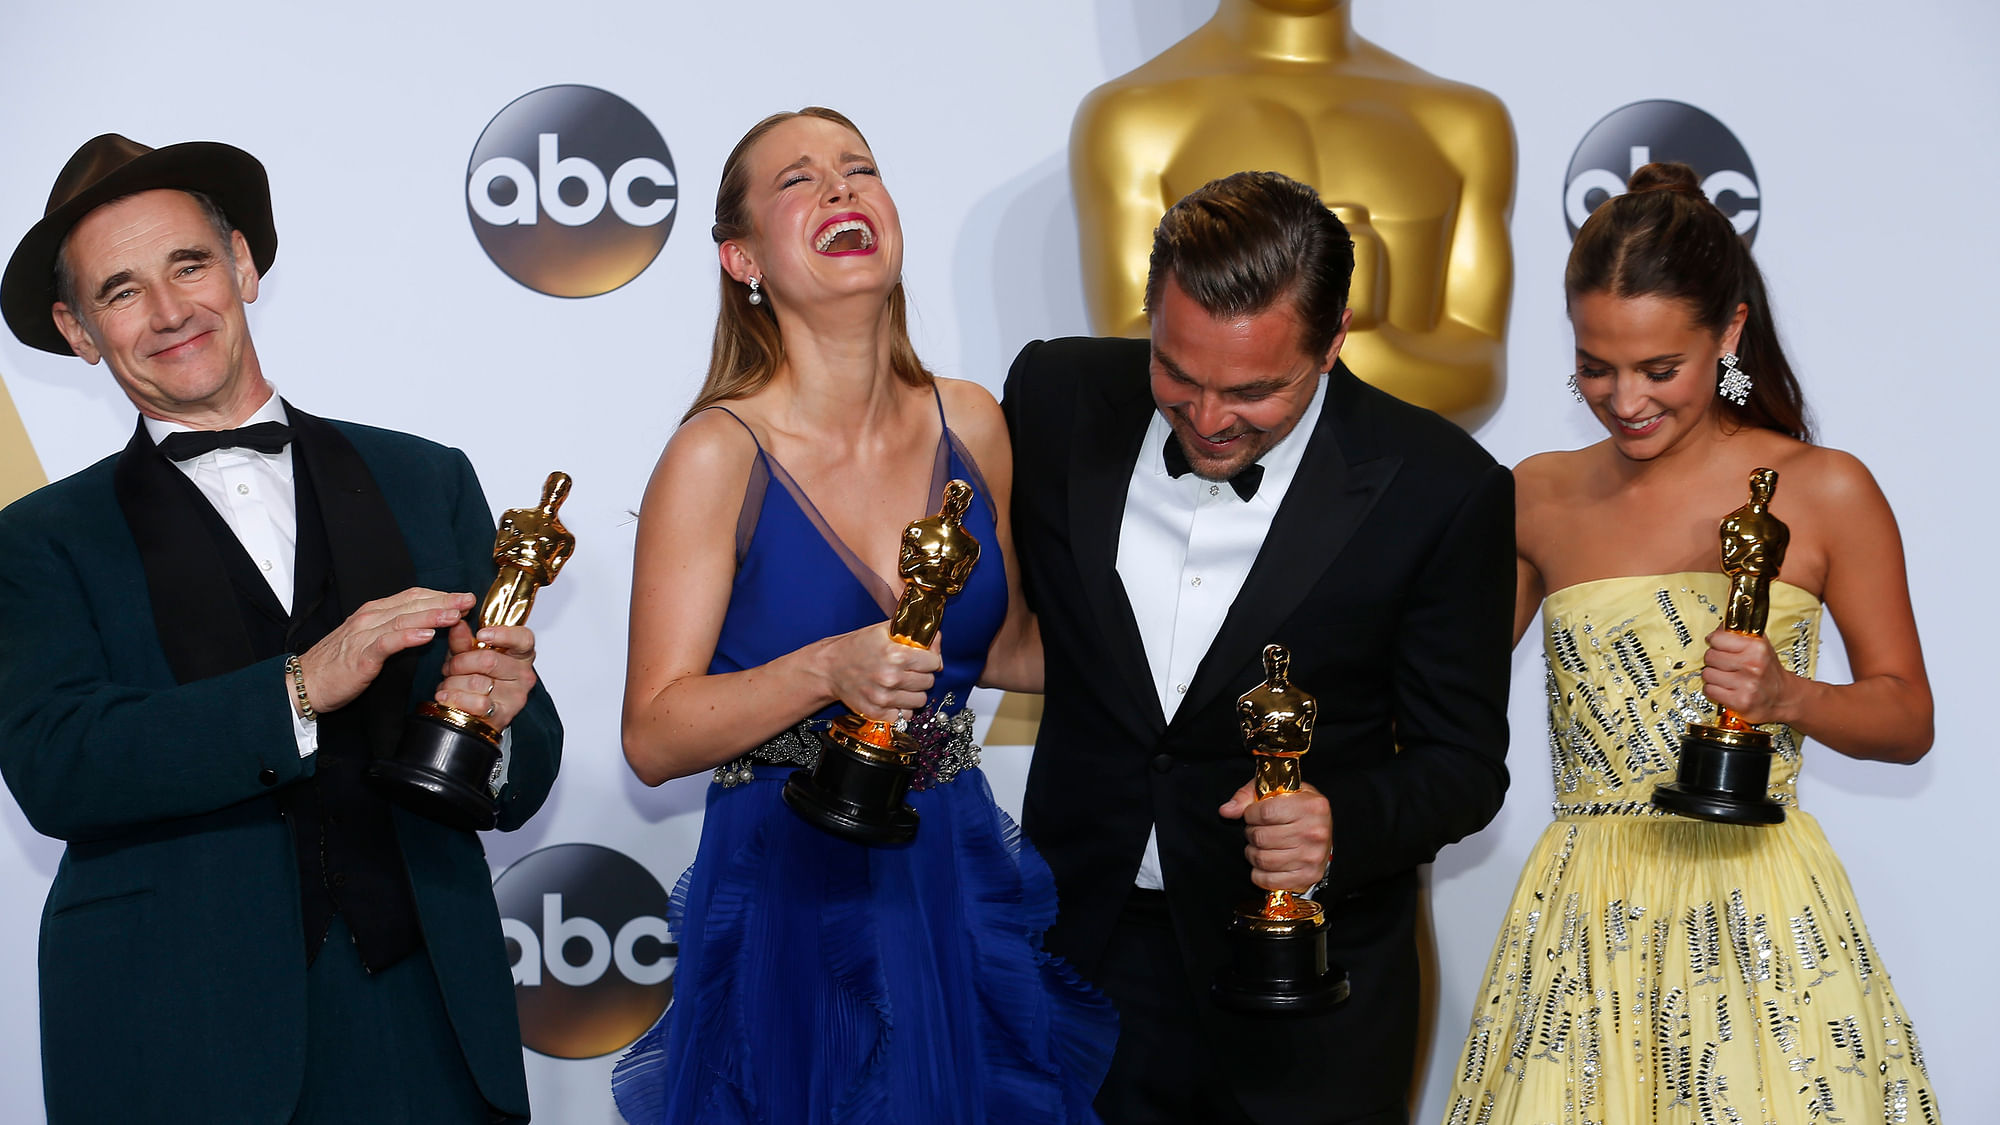 Best Supporting Actor Mark Rylance (L), Best Actress Brie Larson, Best Actor Leonardo DiCaprio and Best Supporting Actress Alicia Vikander (R) pose with their Oscars backstage at the 88th Academy Awards in Hollywood, California February 28, 2016 (Photo: Reuters)